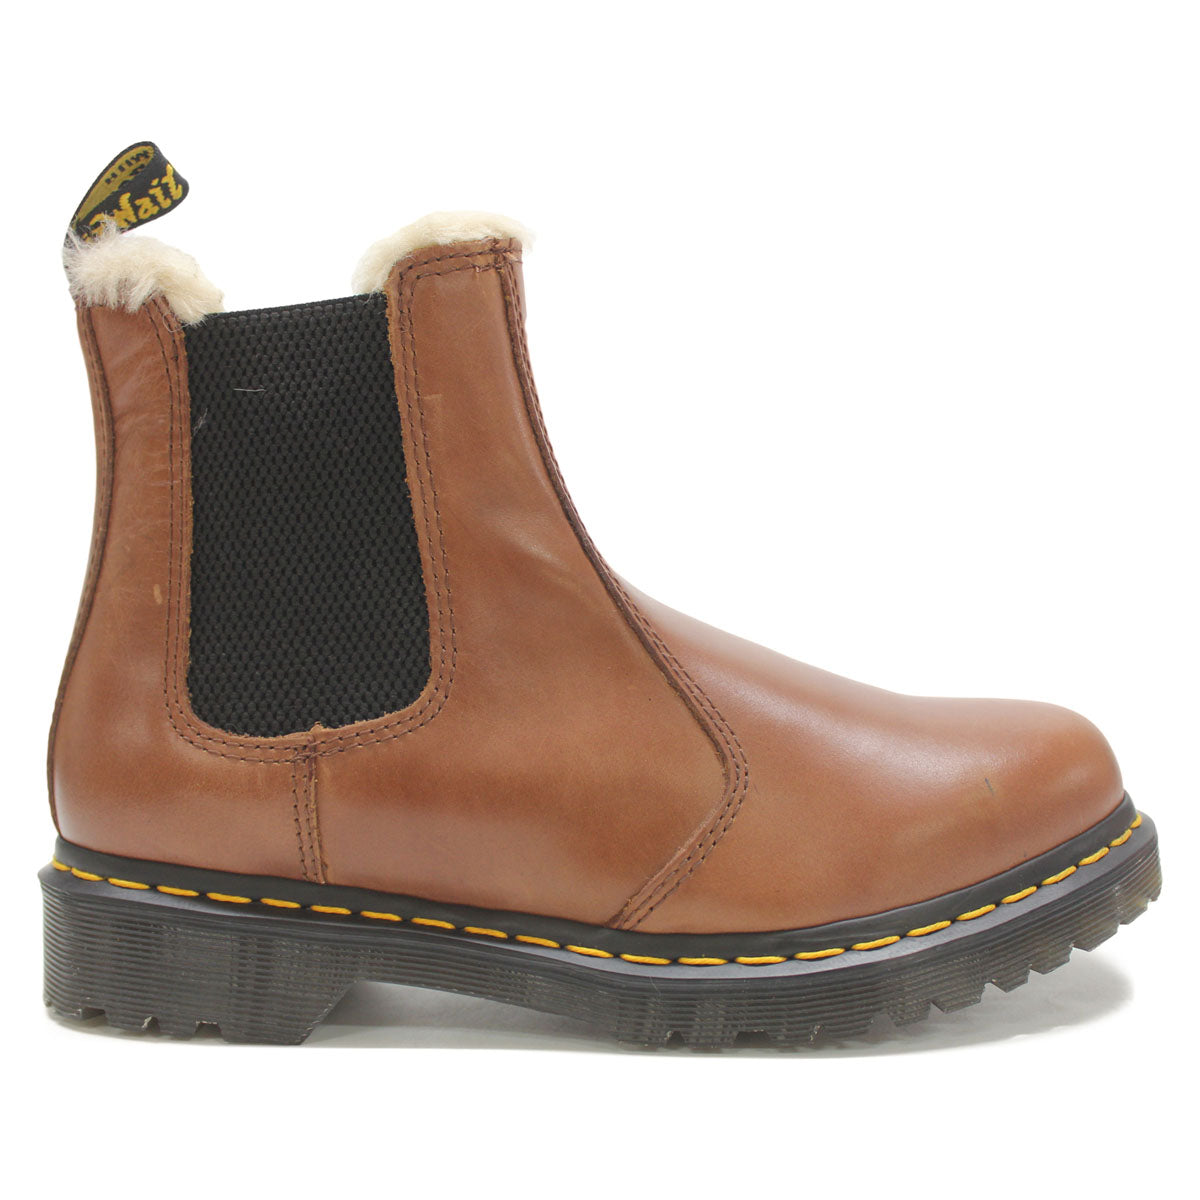 Dr. Martens Womens 2976 Leonore Leather Boots - UK 6.5